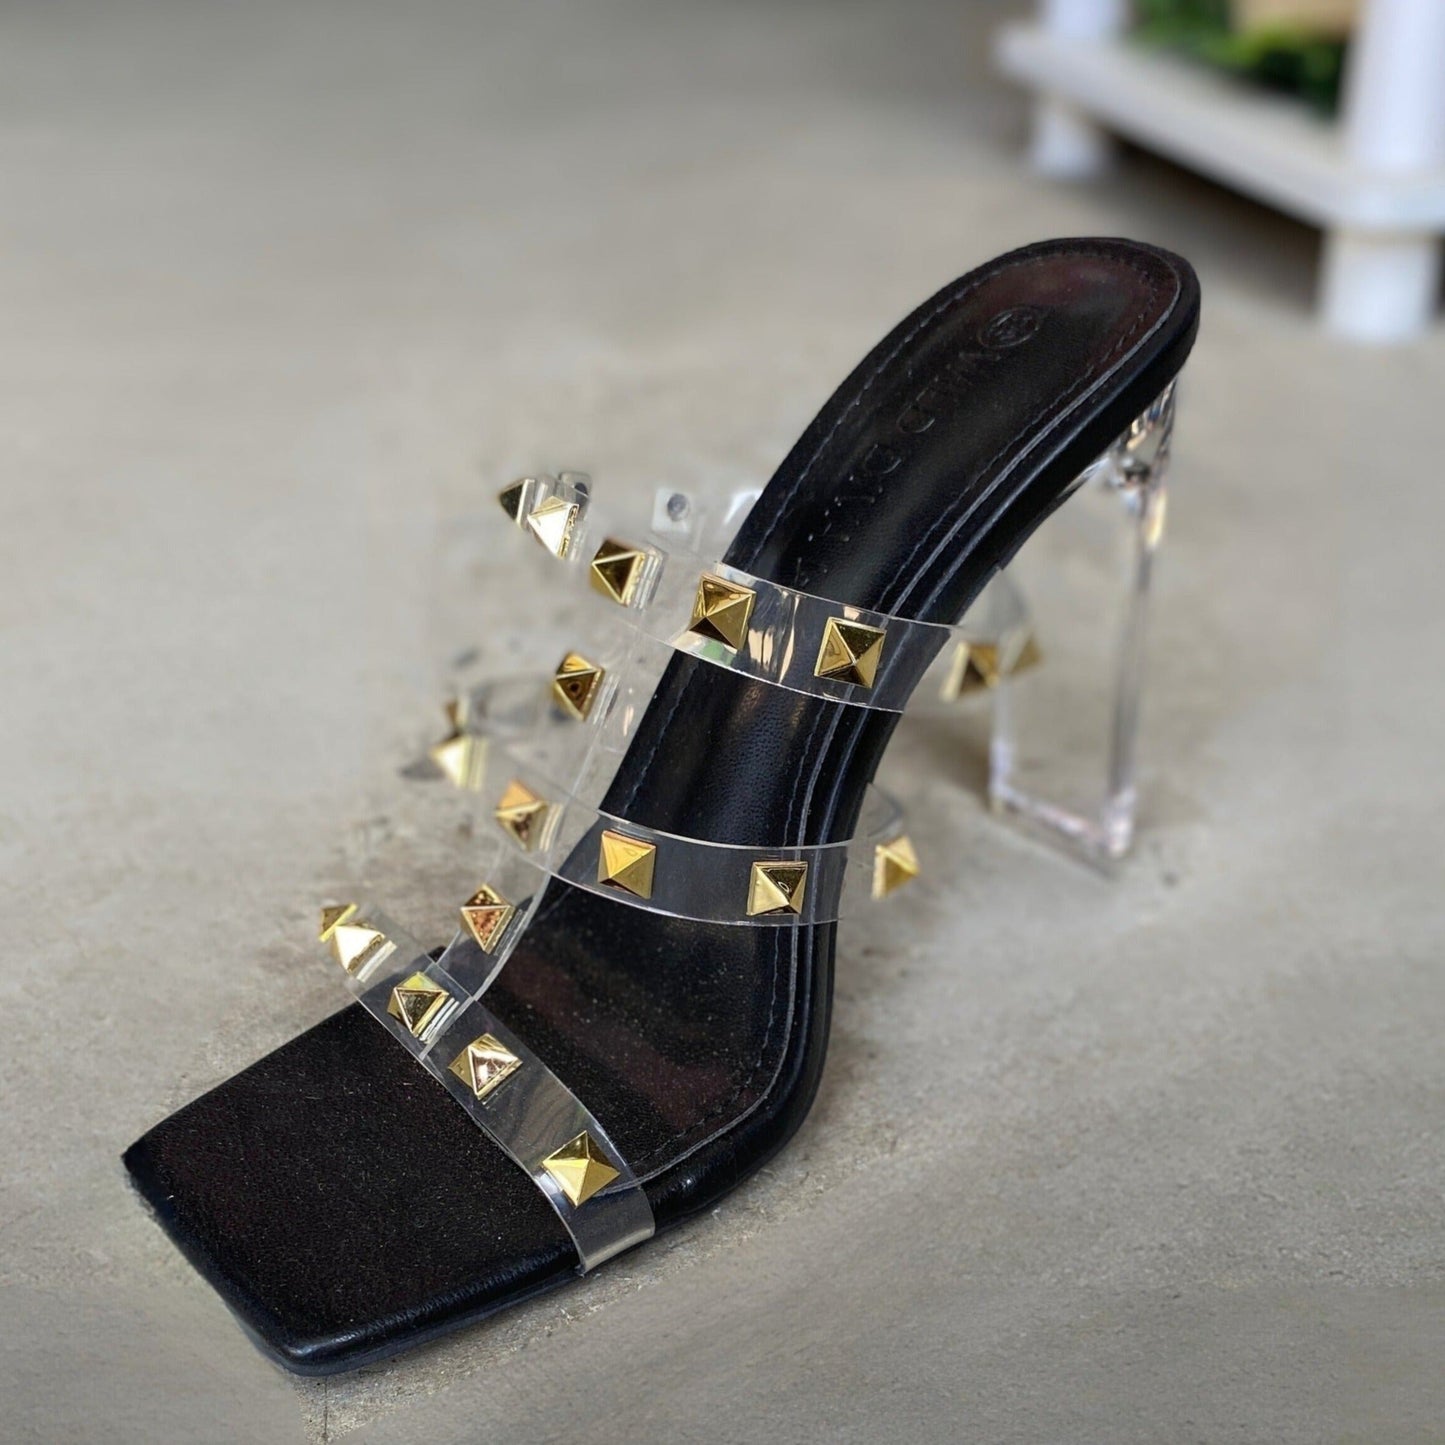 Gold Spike Black Heels Collection